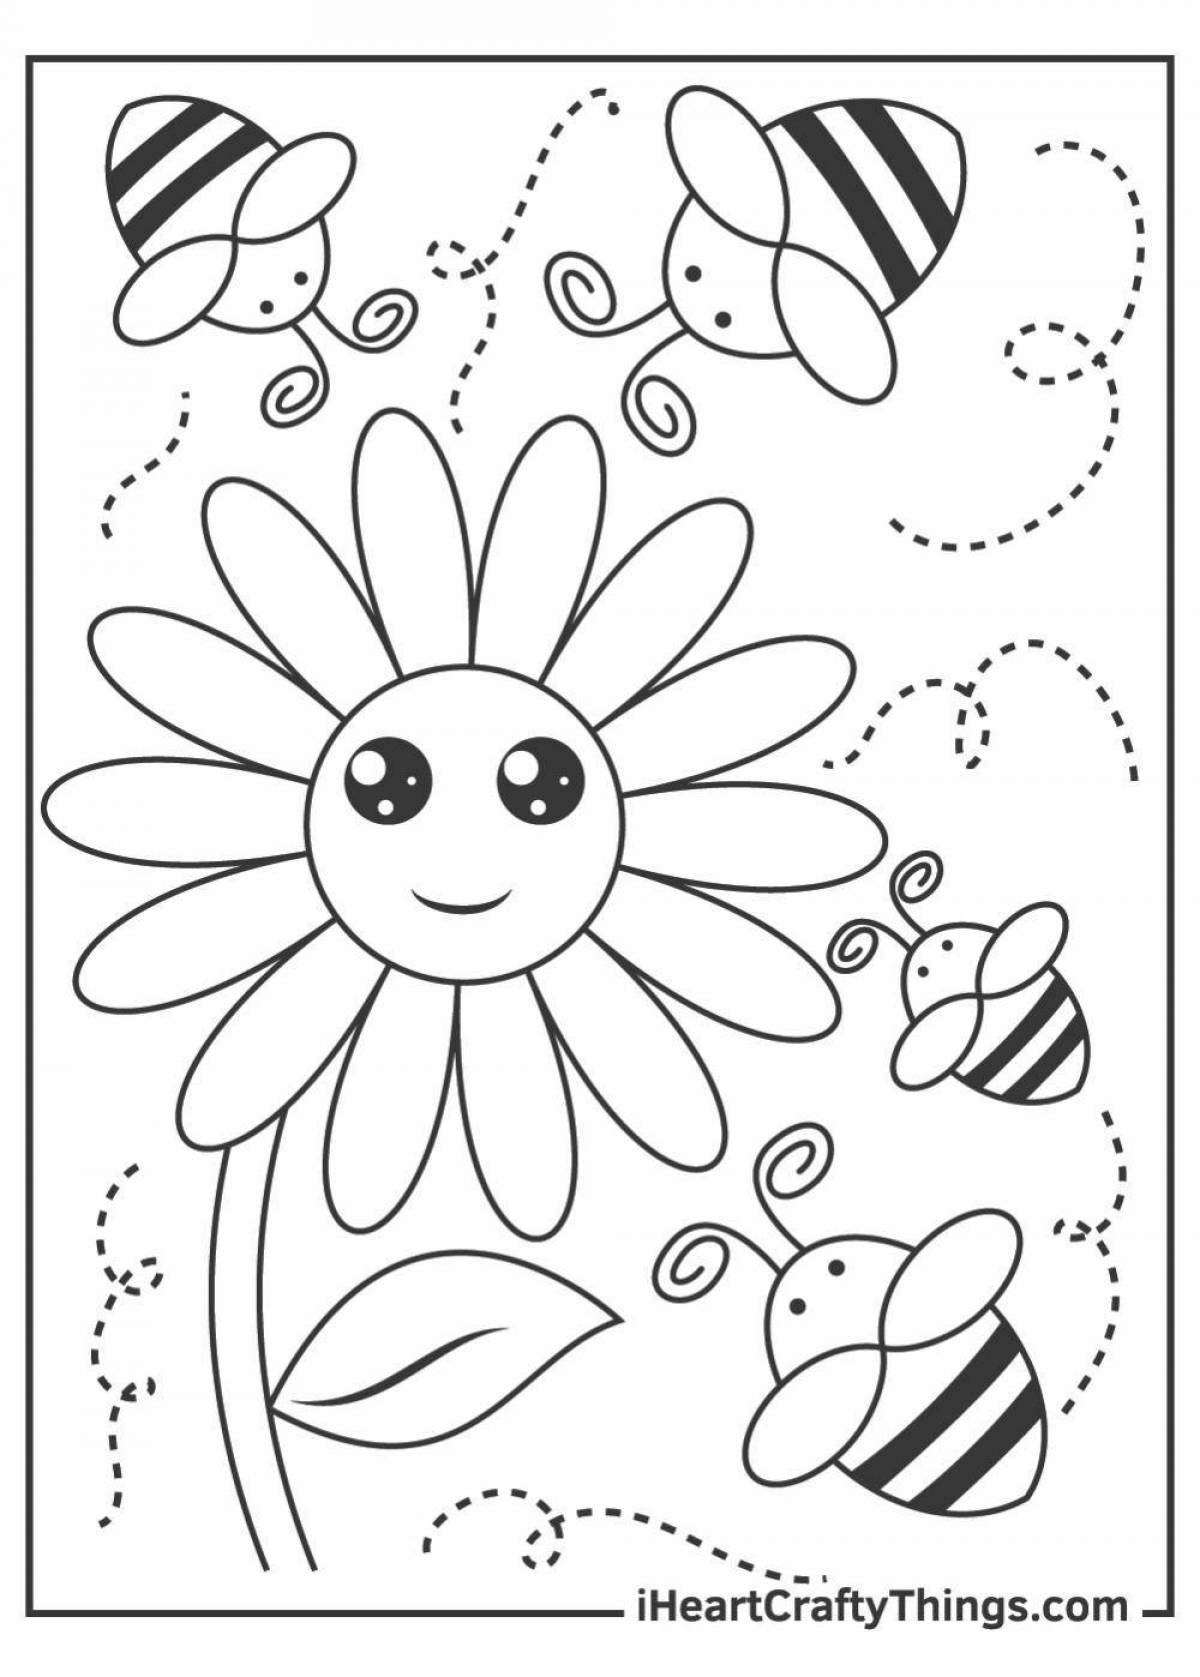 Charming beekeeper coloring book